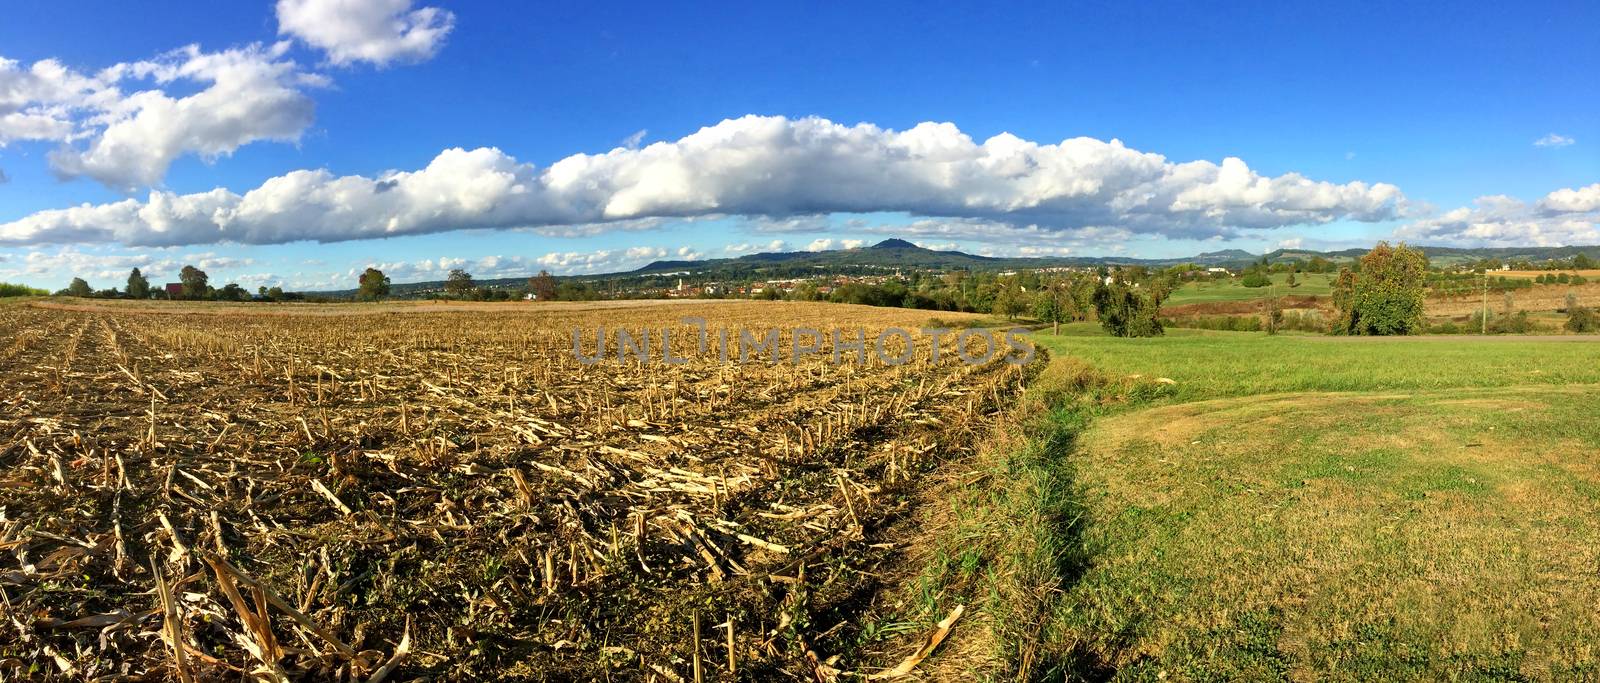 harvested corn field with mountain in the background by Jochen